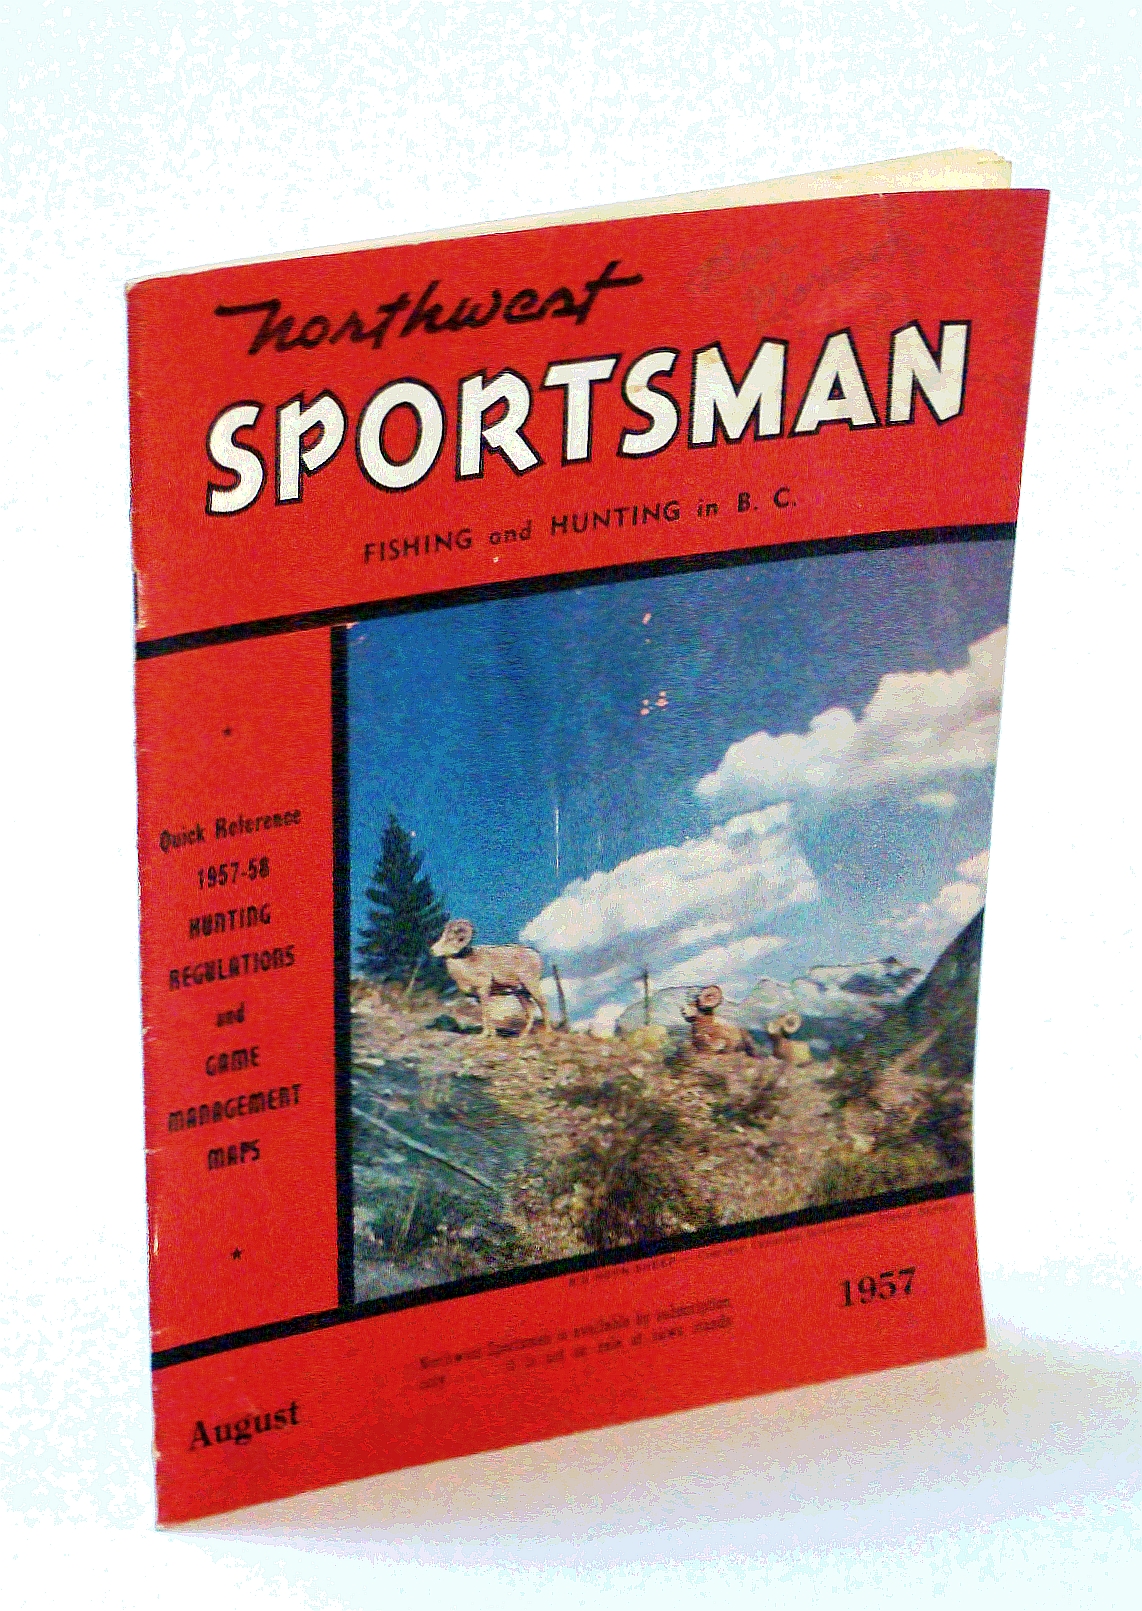 Northwest Sportsman Magazine Fishing, Hunting And Boating In August 1960  Cover Photo Of Einar Norman Of Vancouver, Vancouver Book Reference